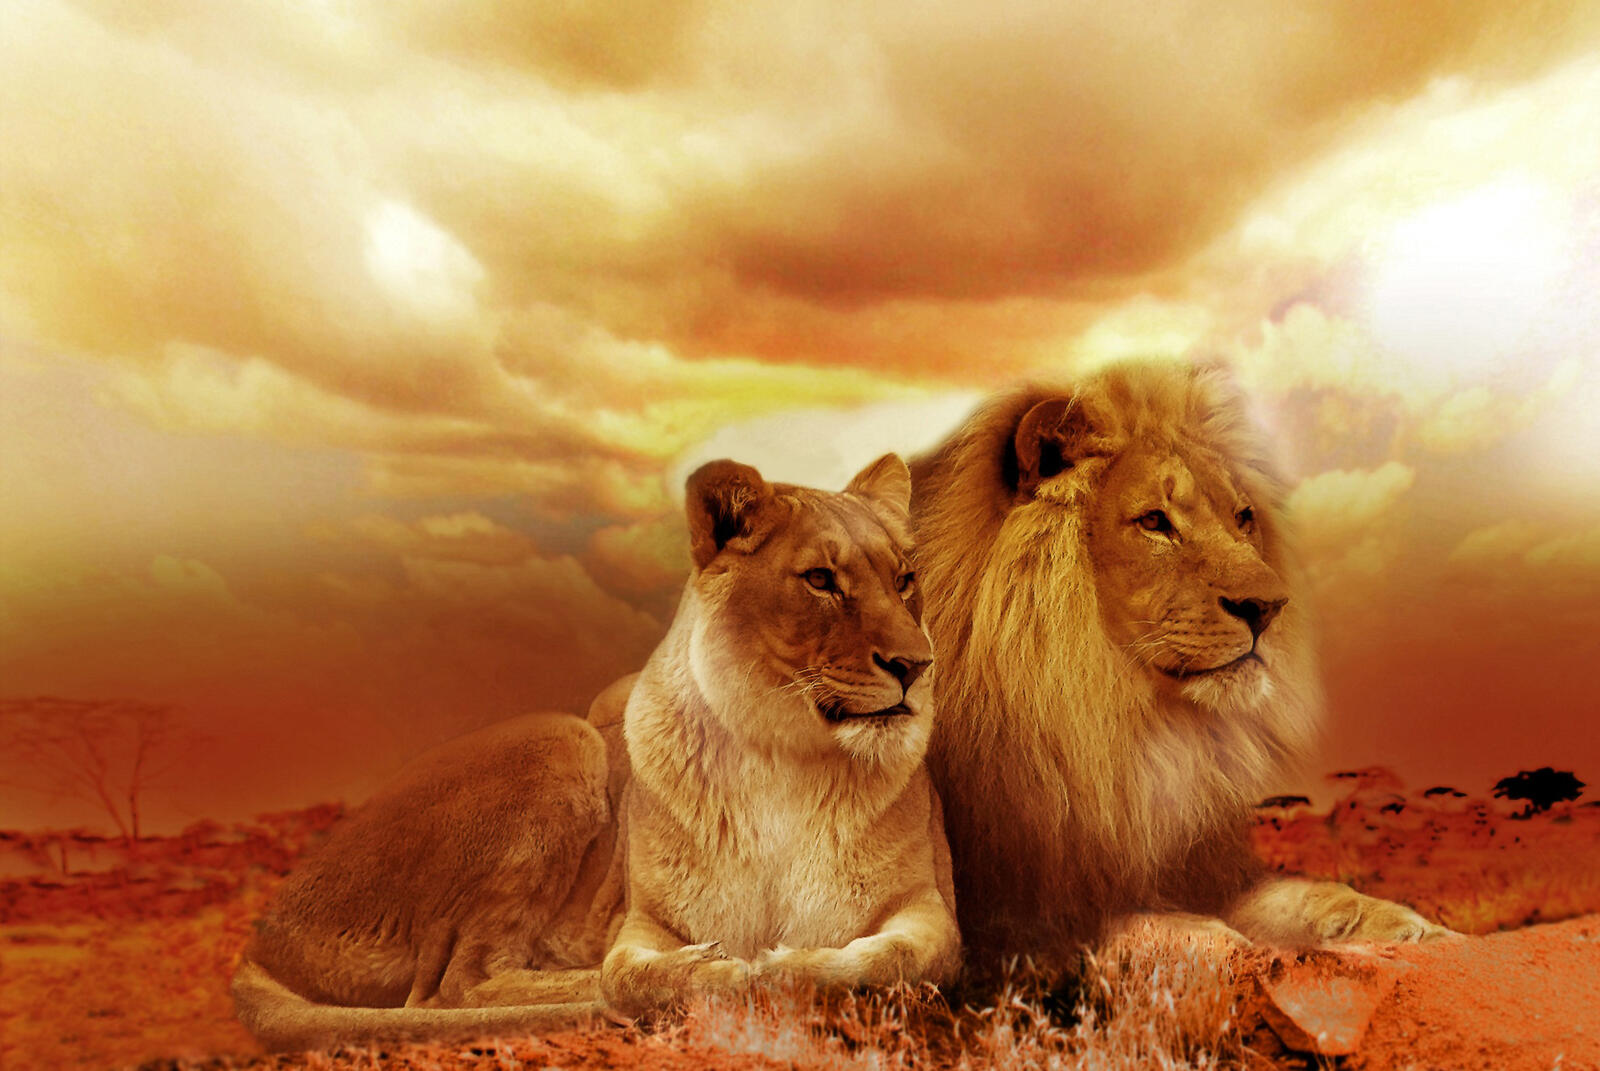 Wallpapers lion clouds sight on the desktop